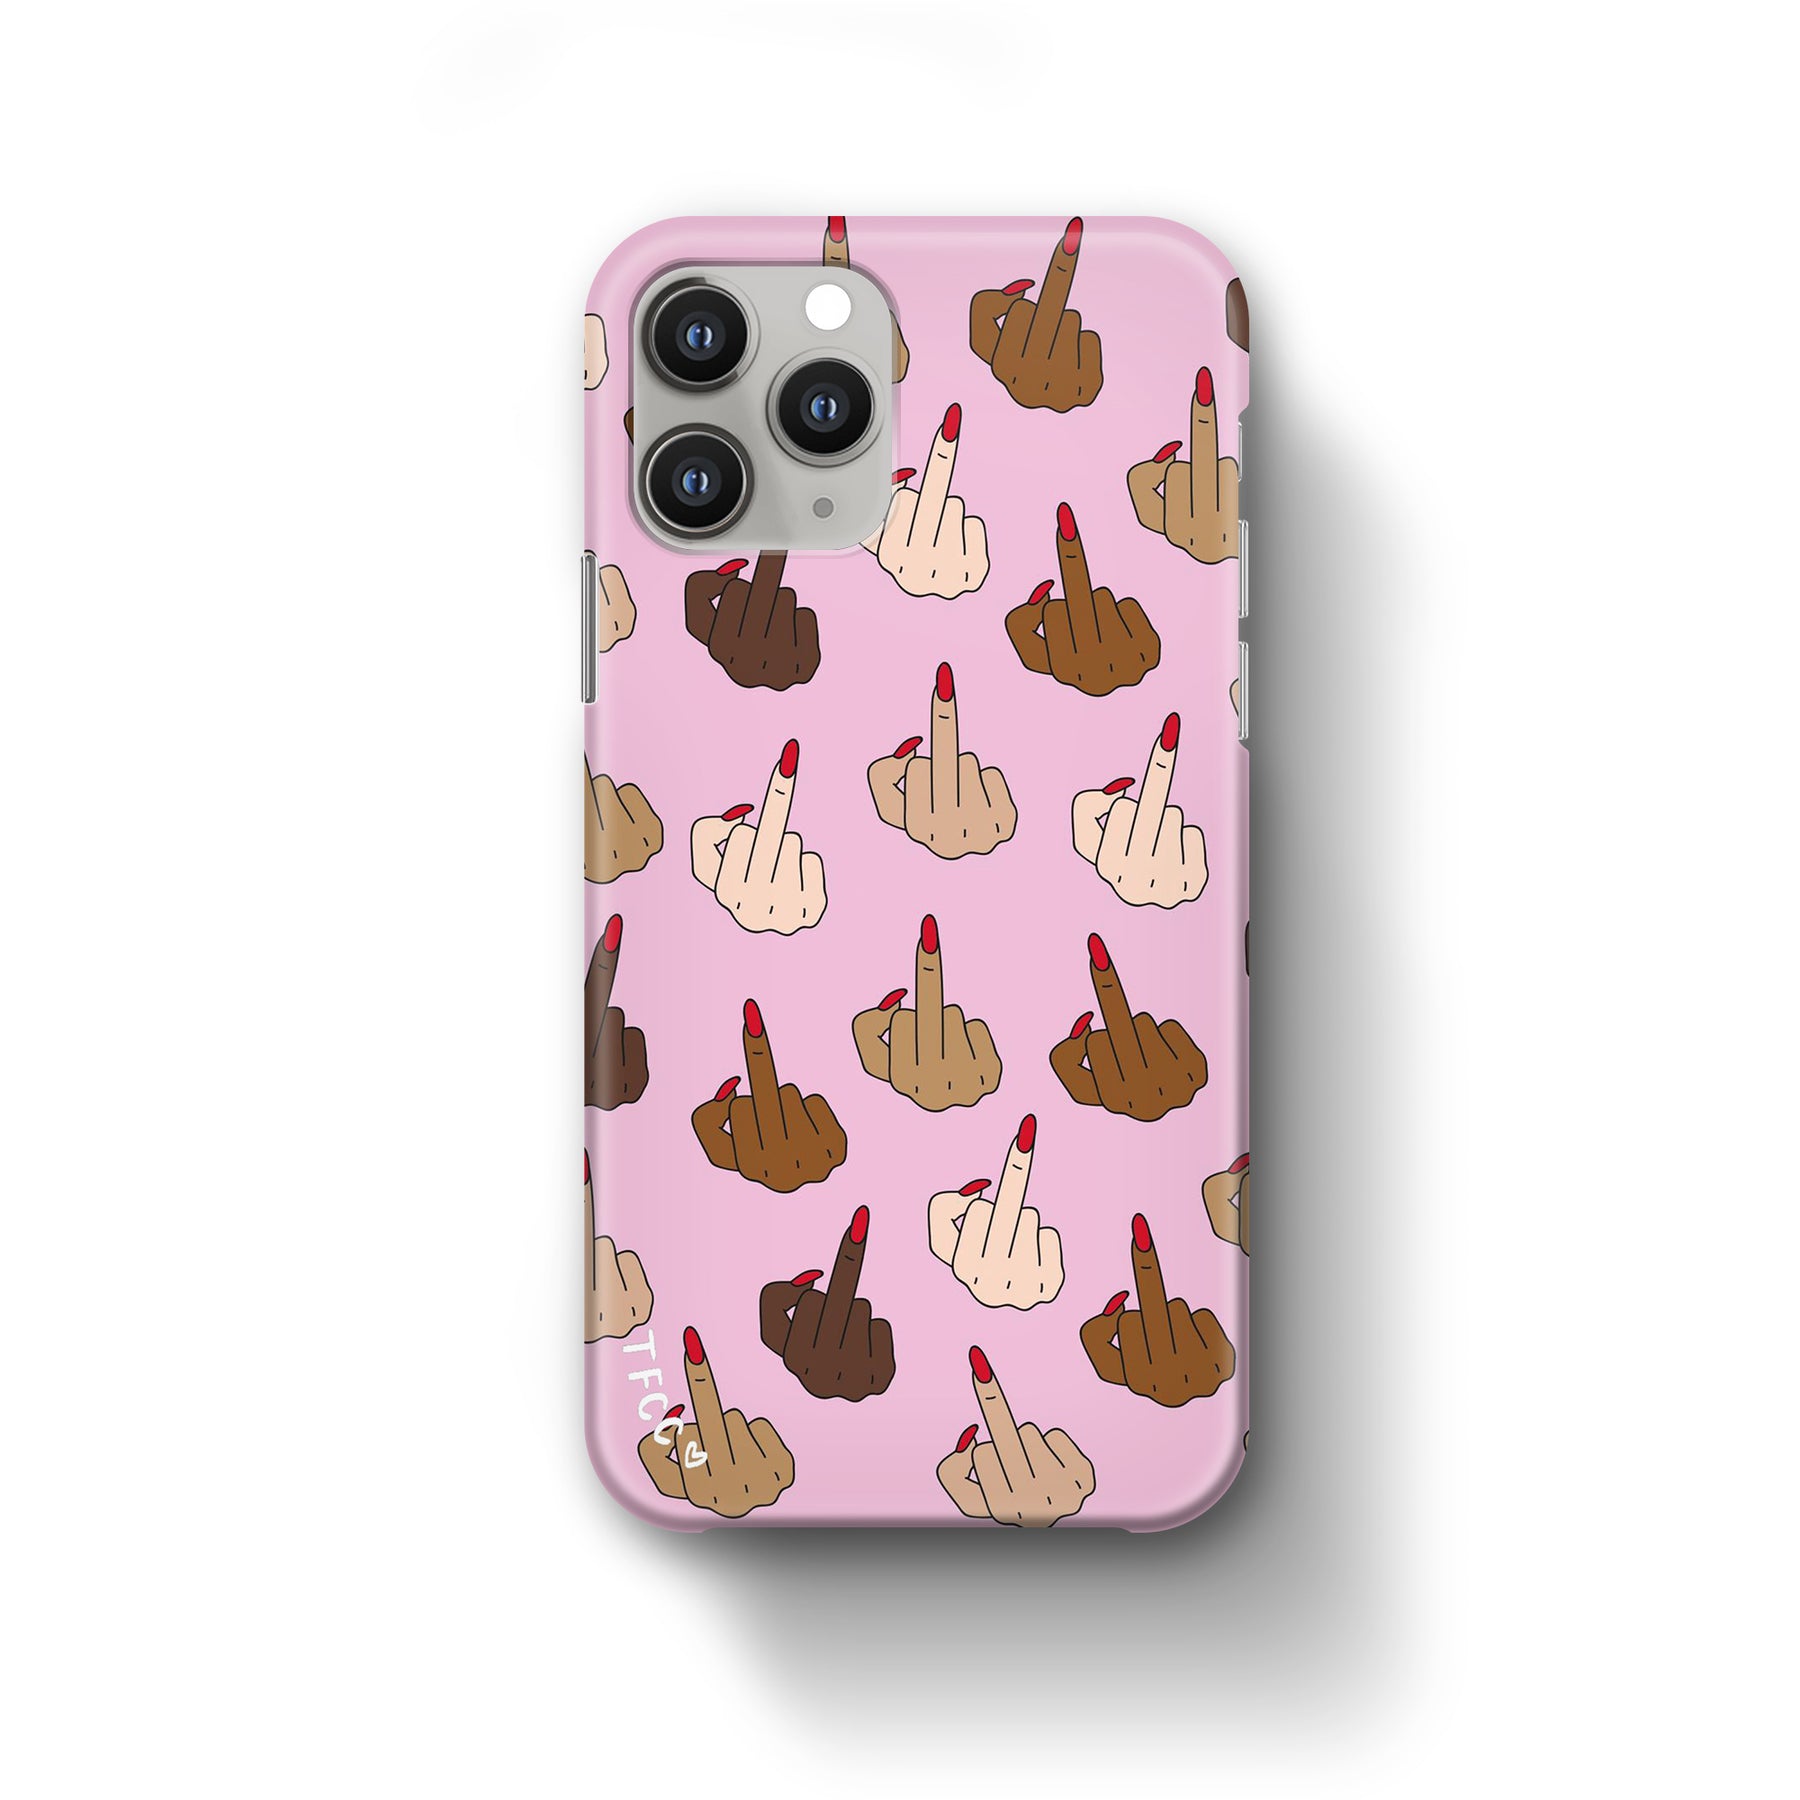 Middle Finger Case - thefonecasecompany